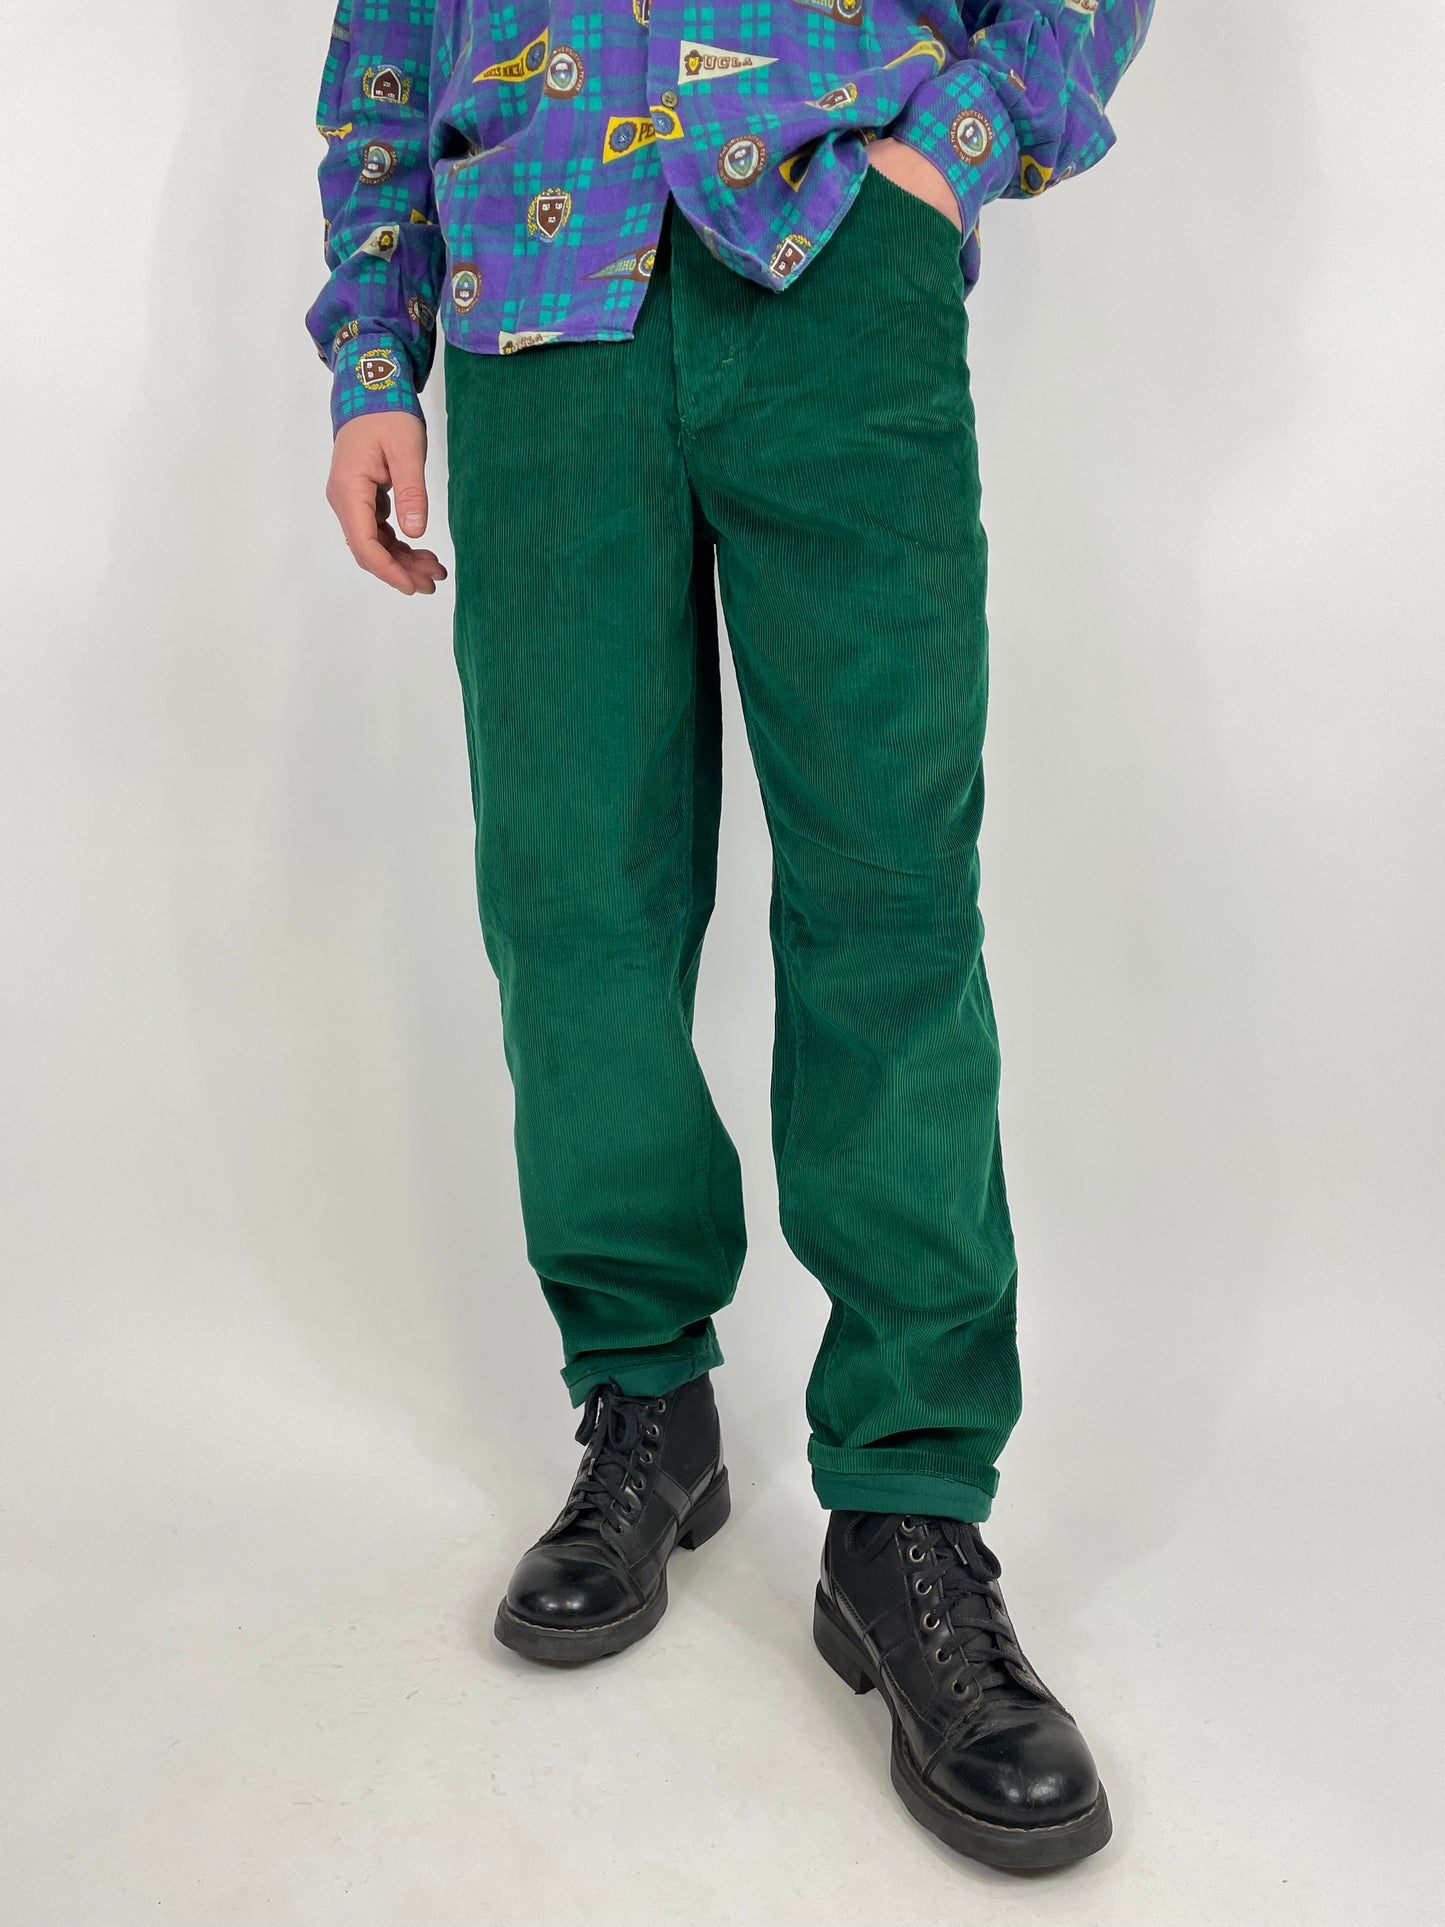 Best Company 1980s trousers